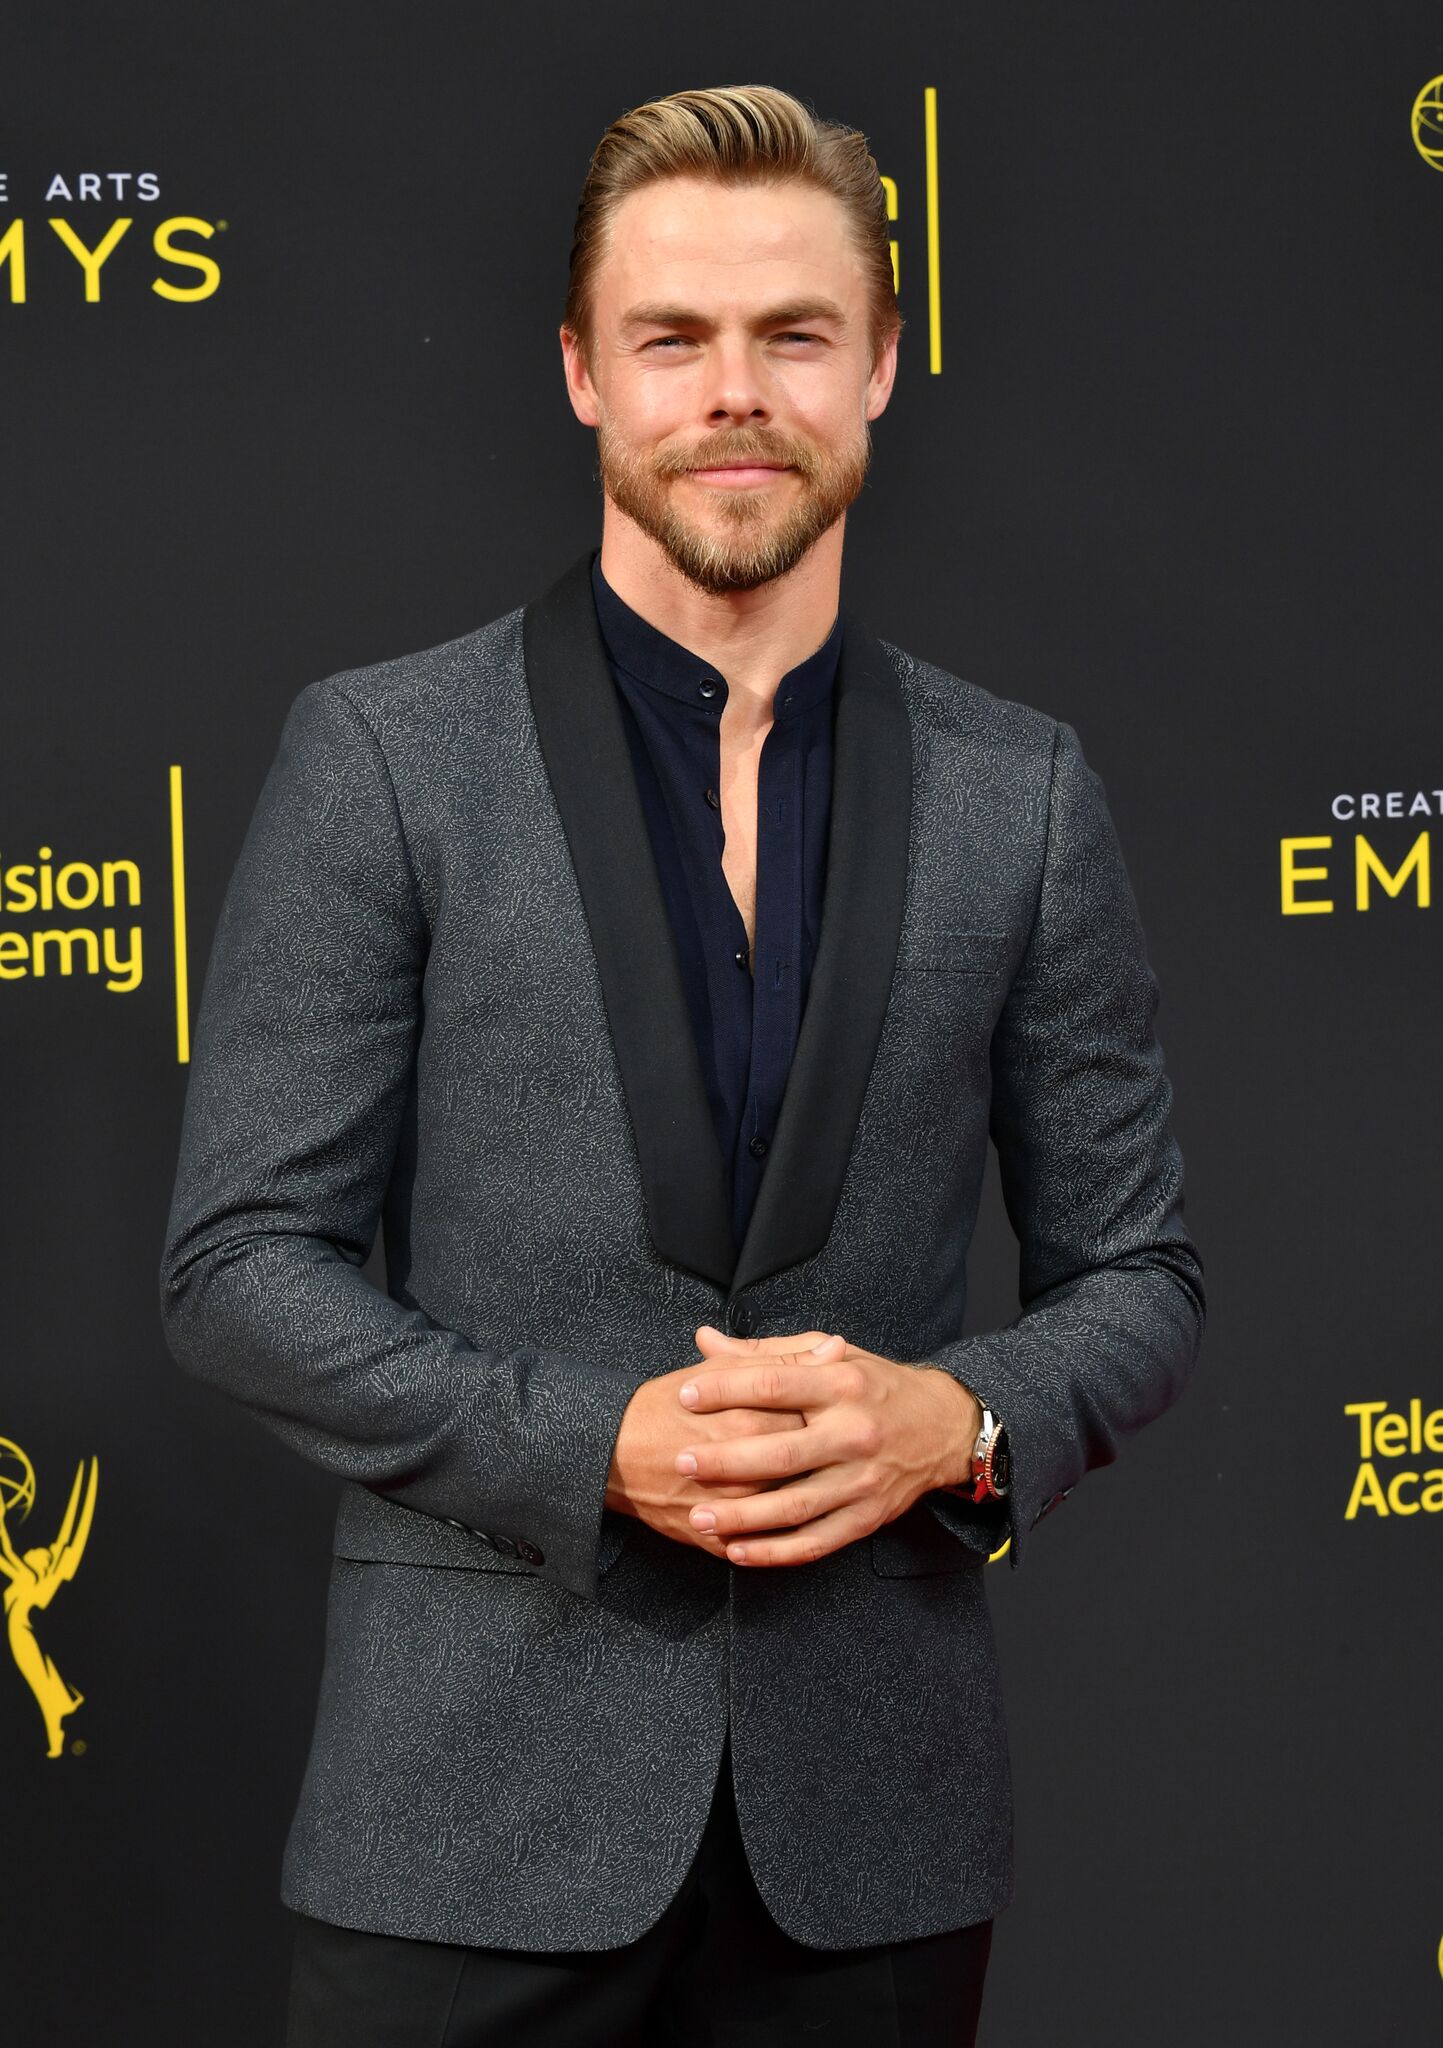 Derek Hough attends the 2019 Creative Arts Emmy Awards on September 14, 2019 | Photo: Getty Images